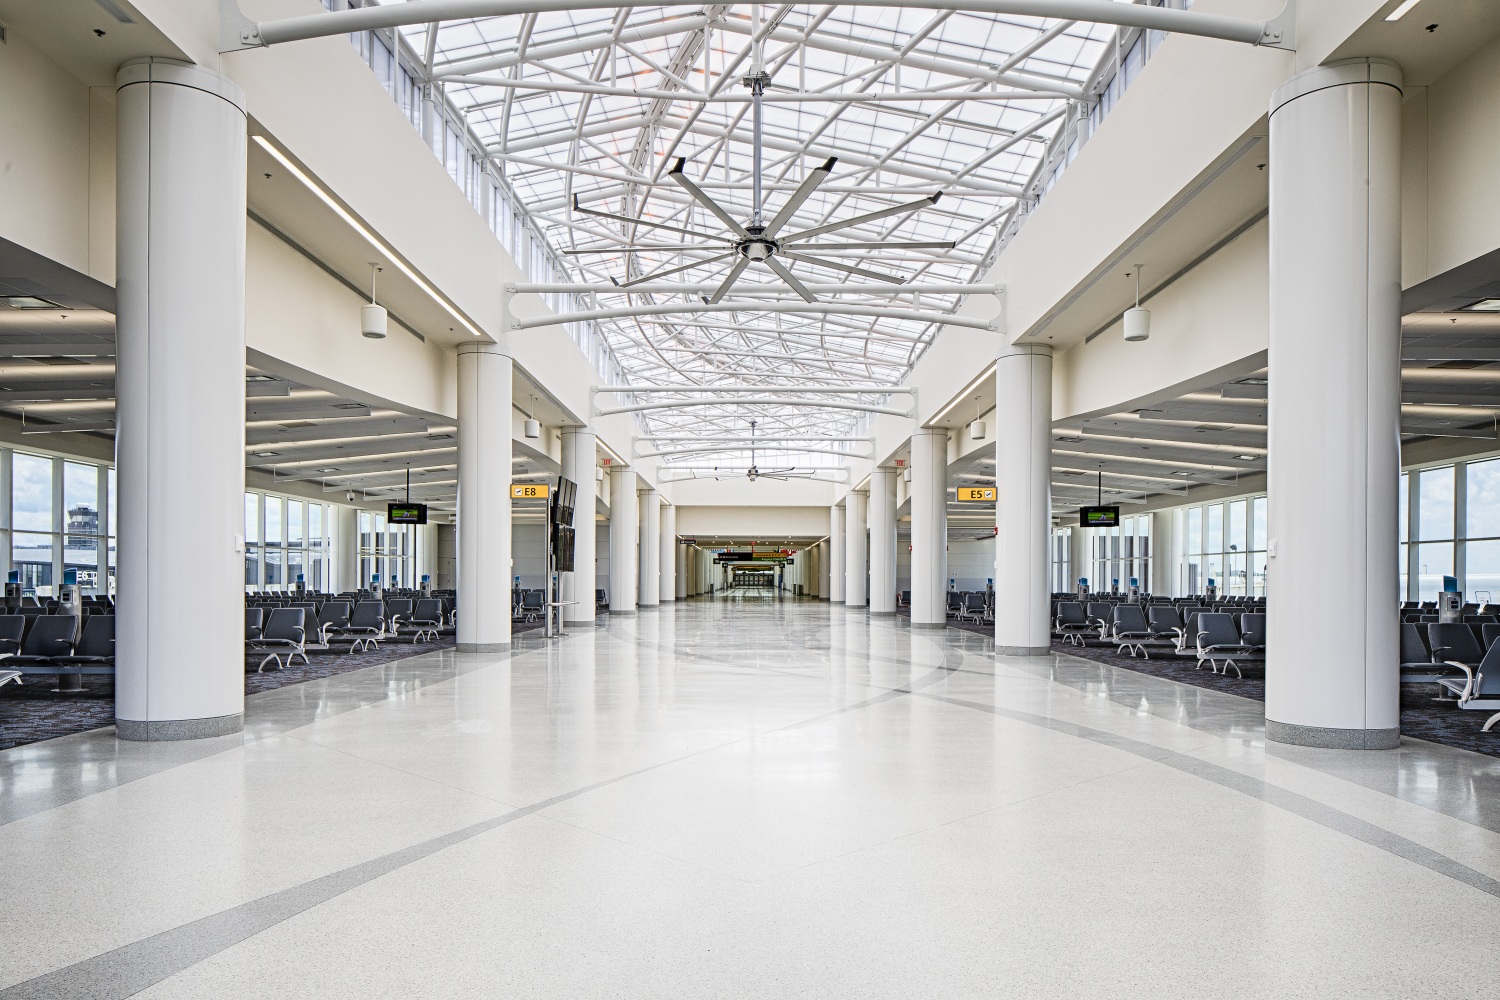 BWI Concourse E Extension - Whiting-Turner